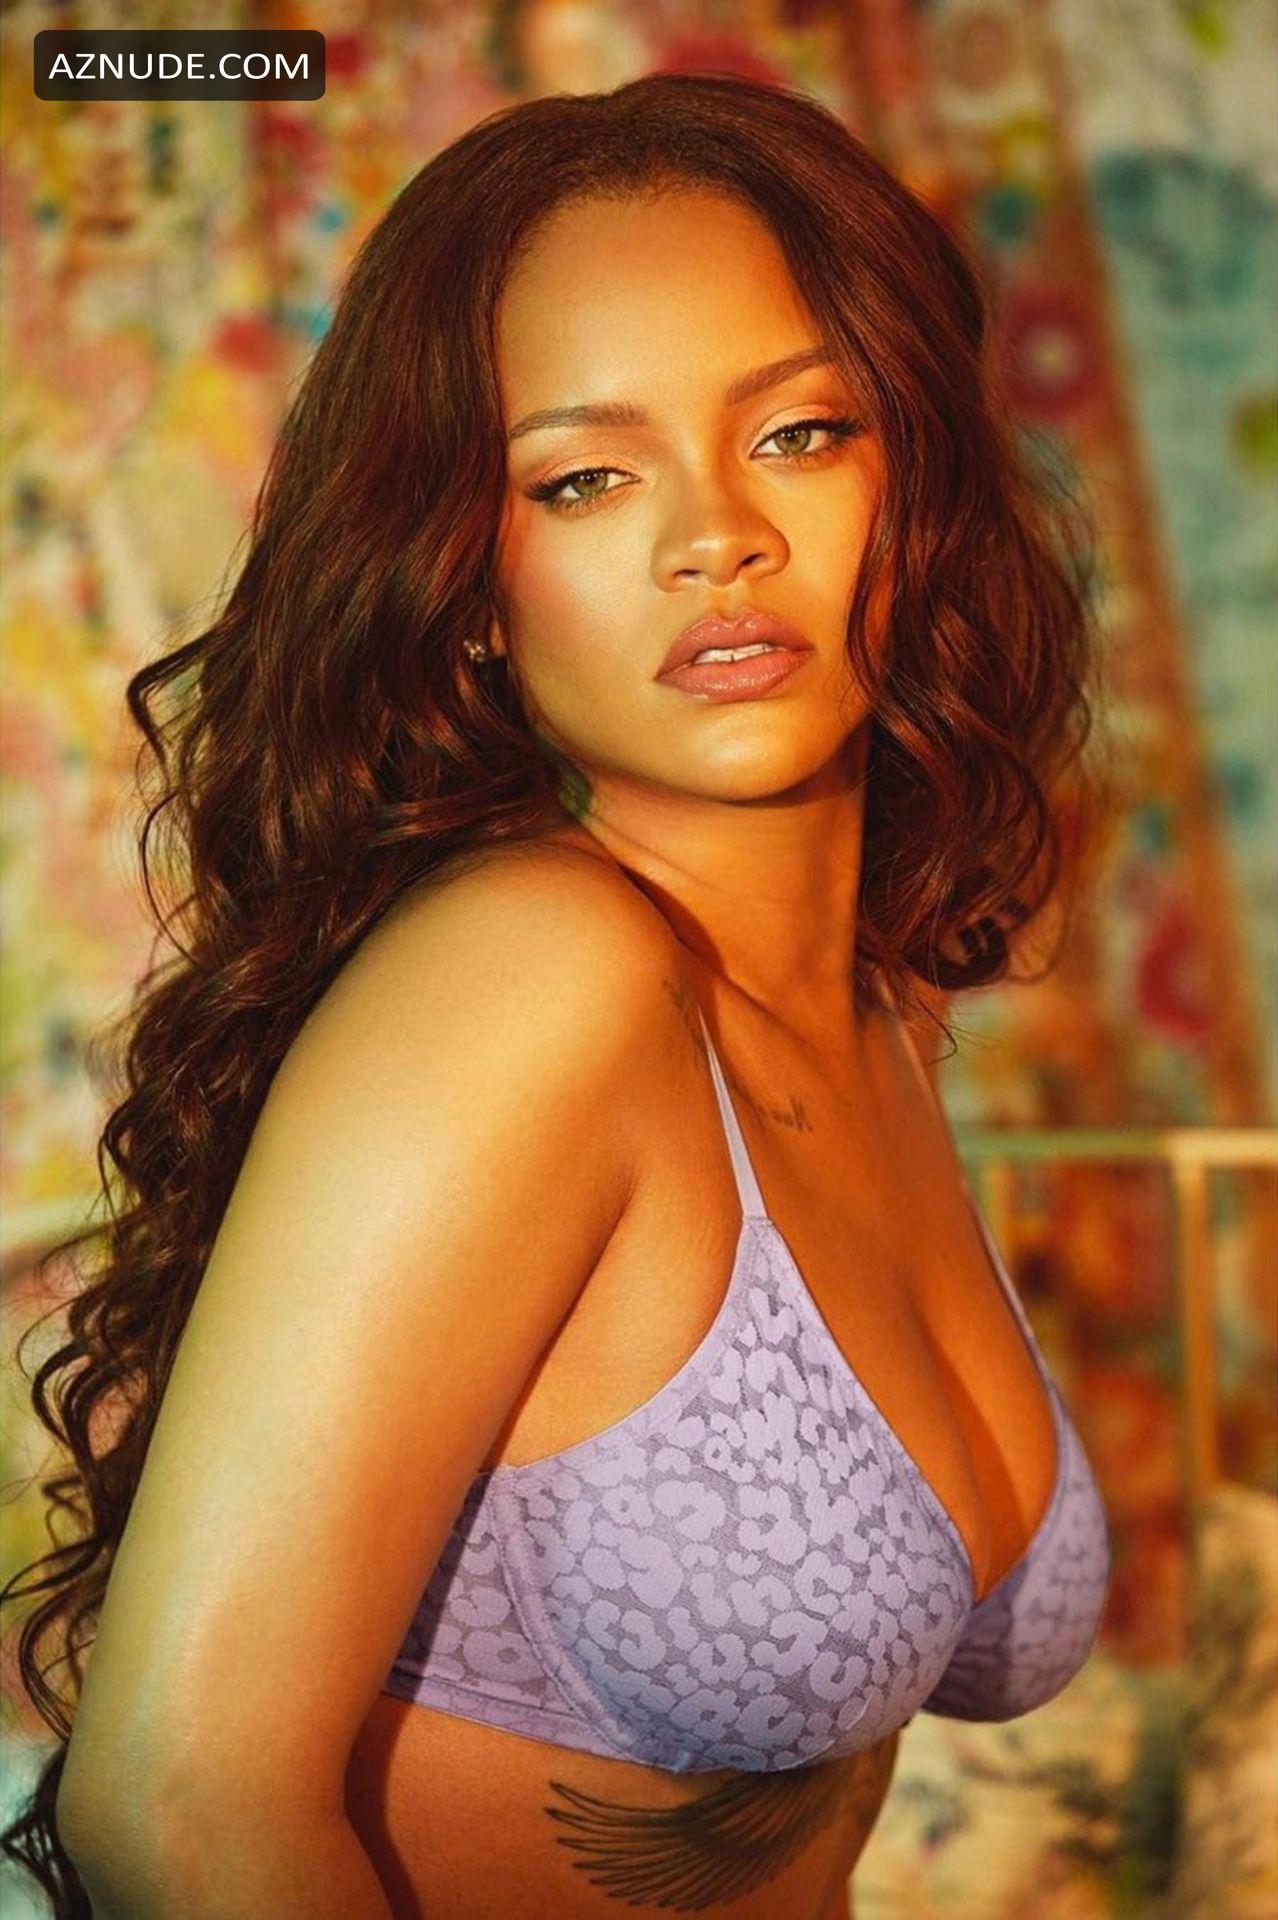 Rihanna Robyn Fenty Continues To Be The Best Model For Her Savage X Fenty Lingerie Line Aznude